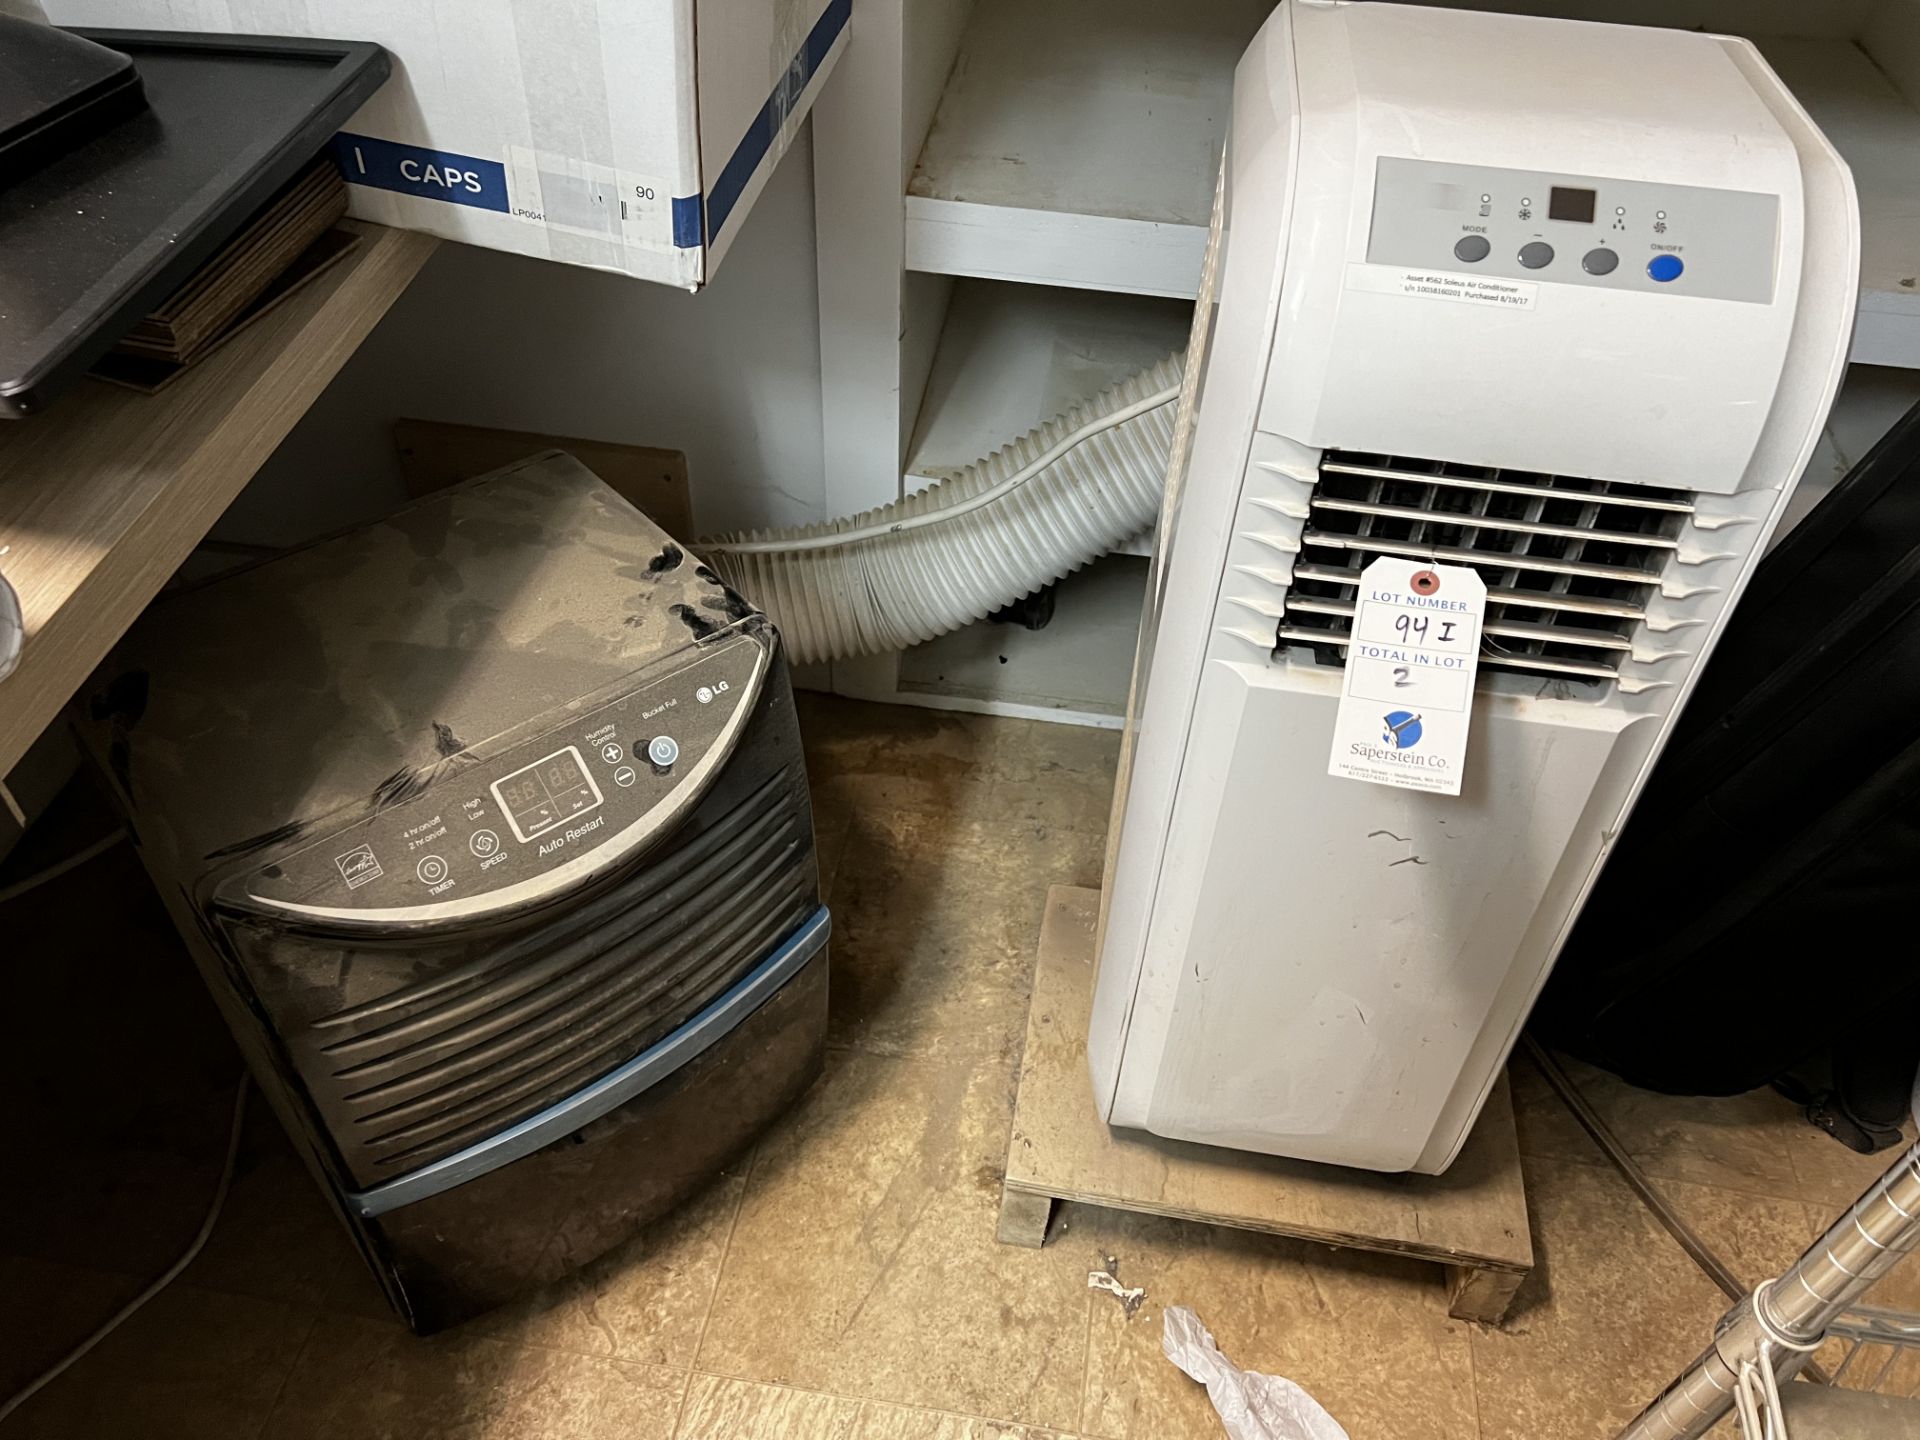 {LOT} 1 Port. Room A/C, 1 Dehumidifier (BEING SOLD BY THE LOT)